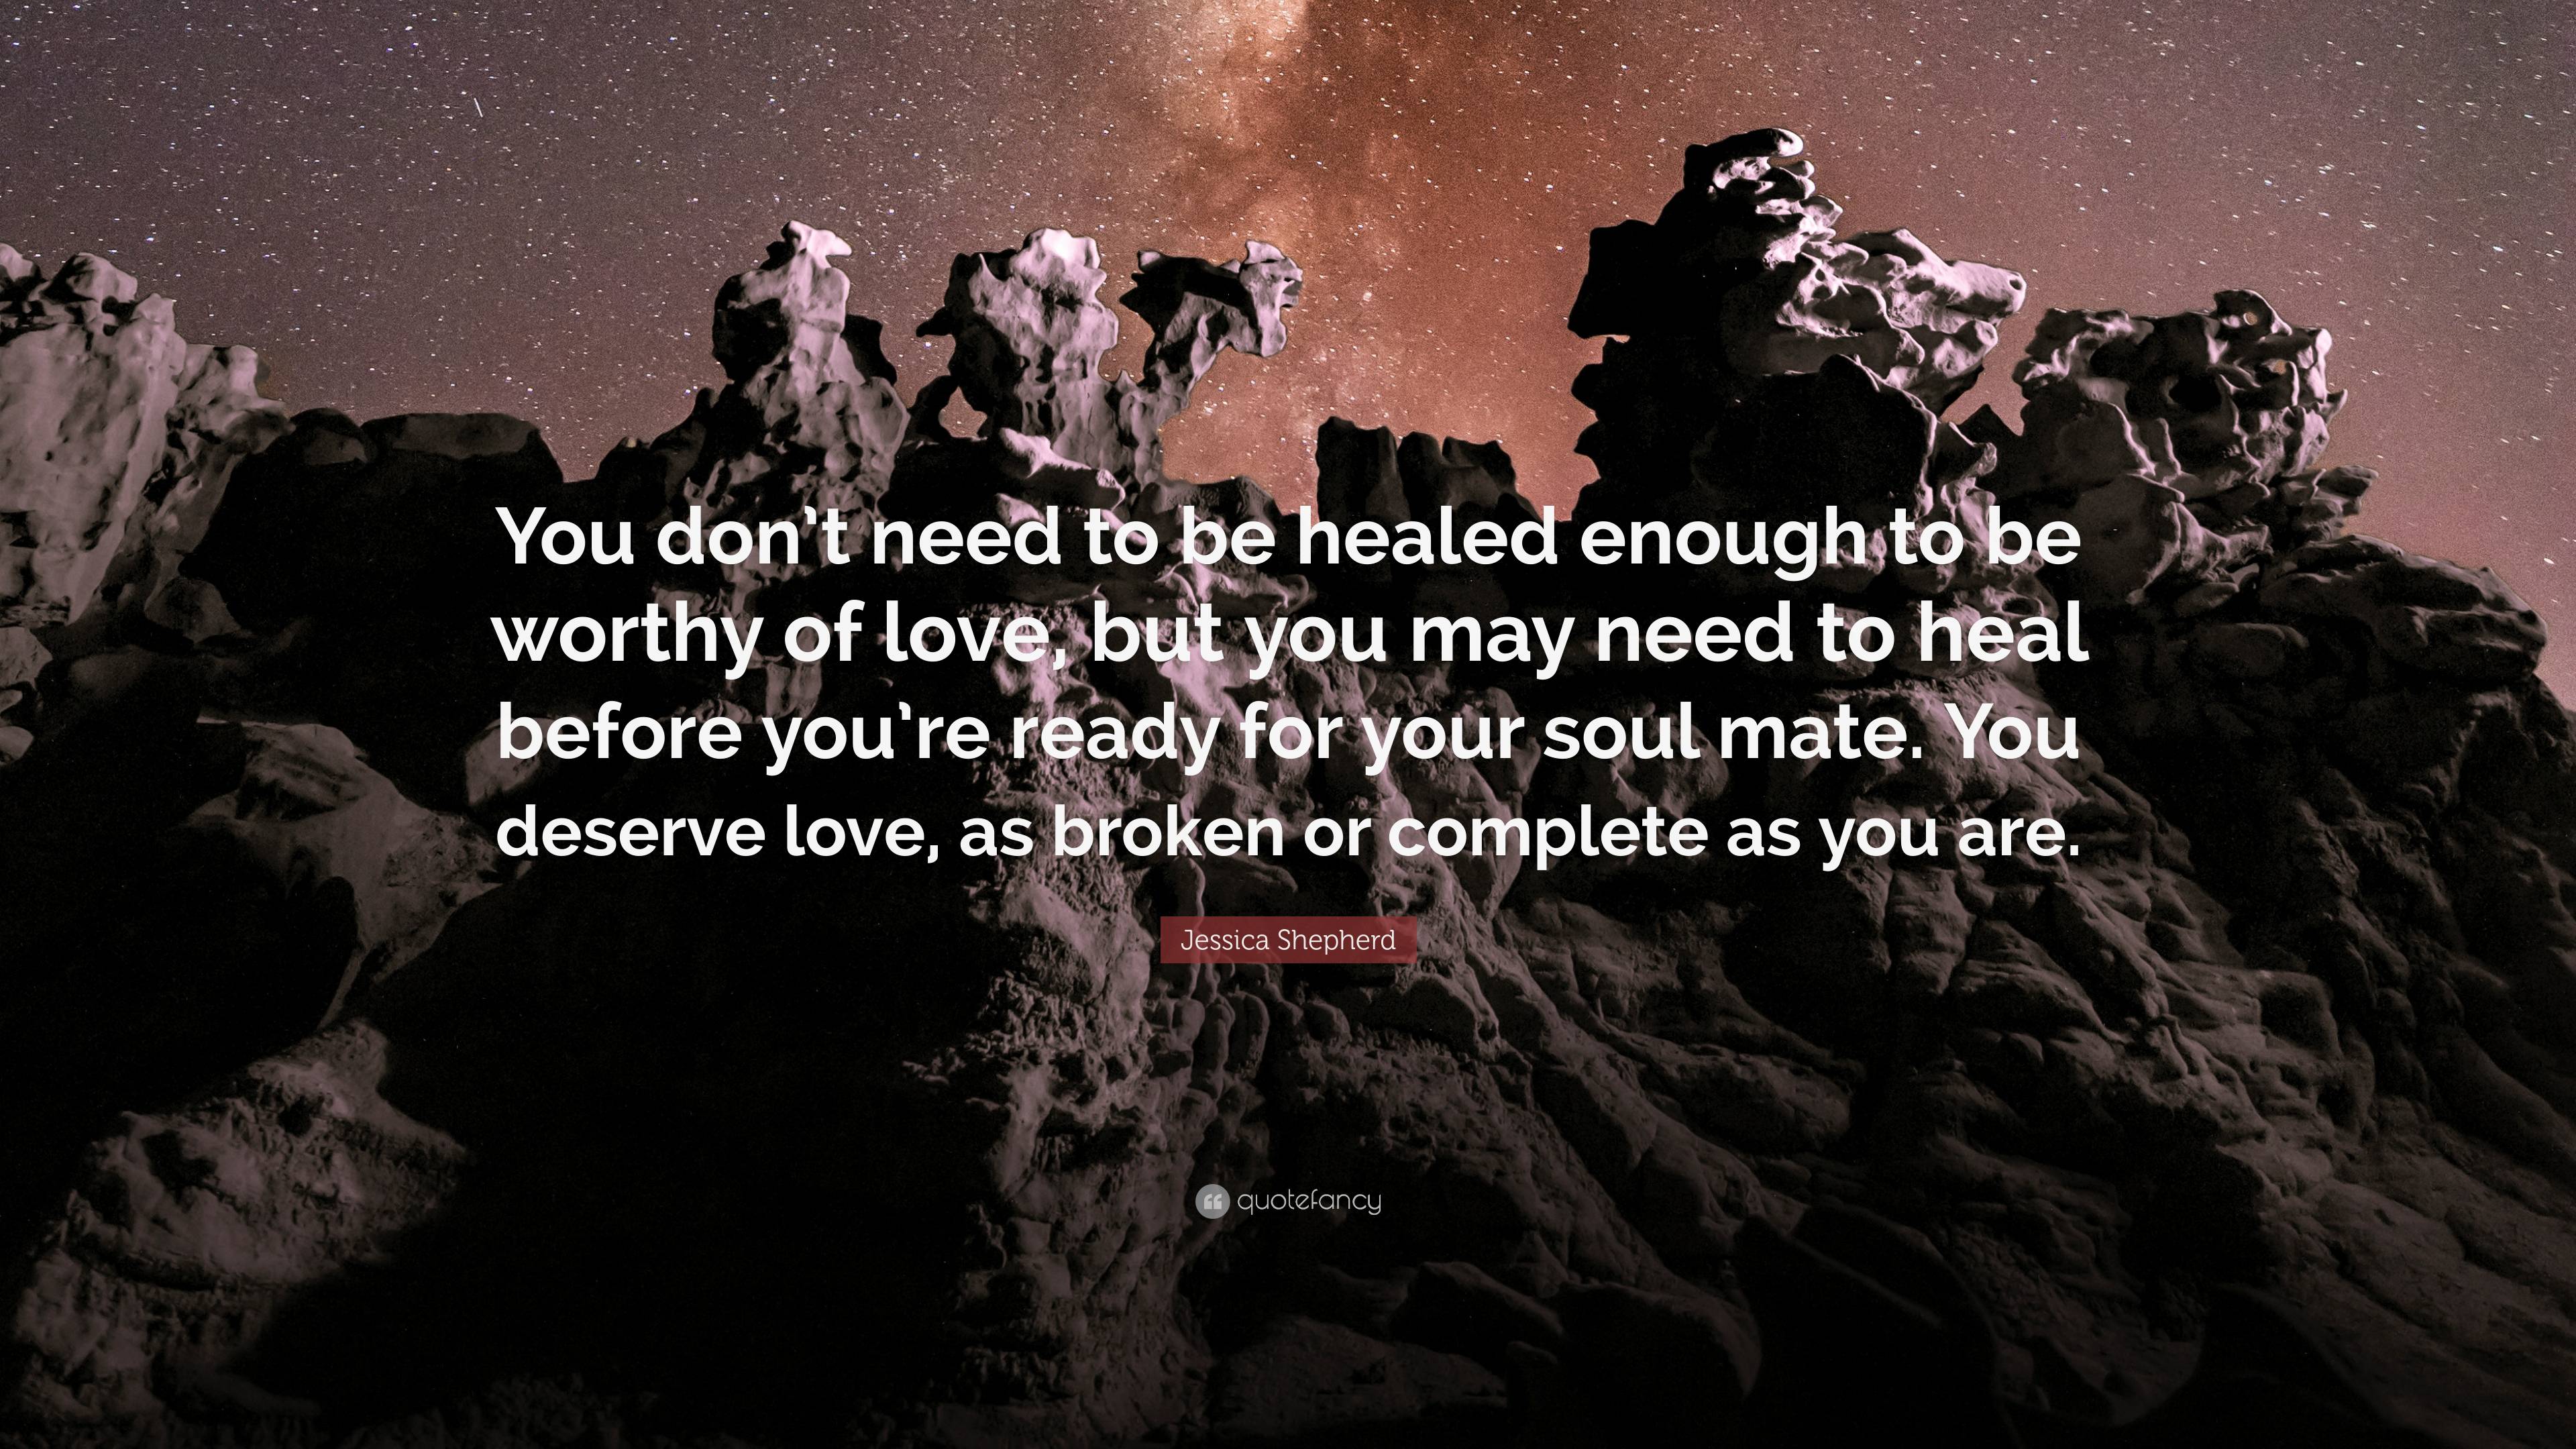 What You Don't Know About Love and How It Heals